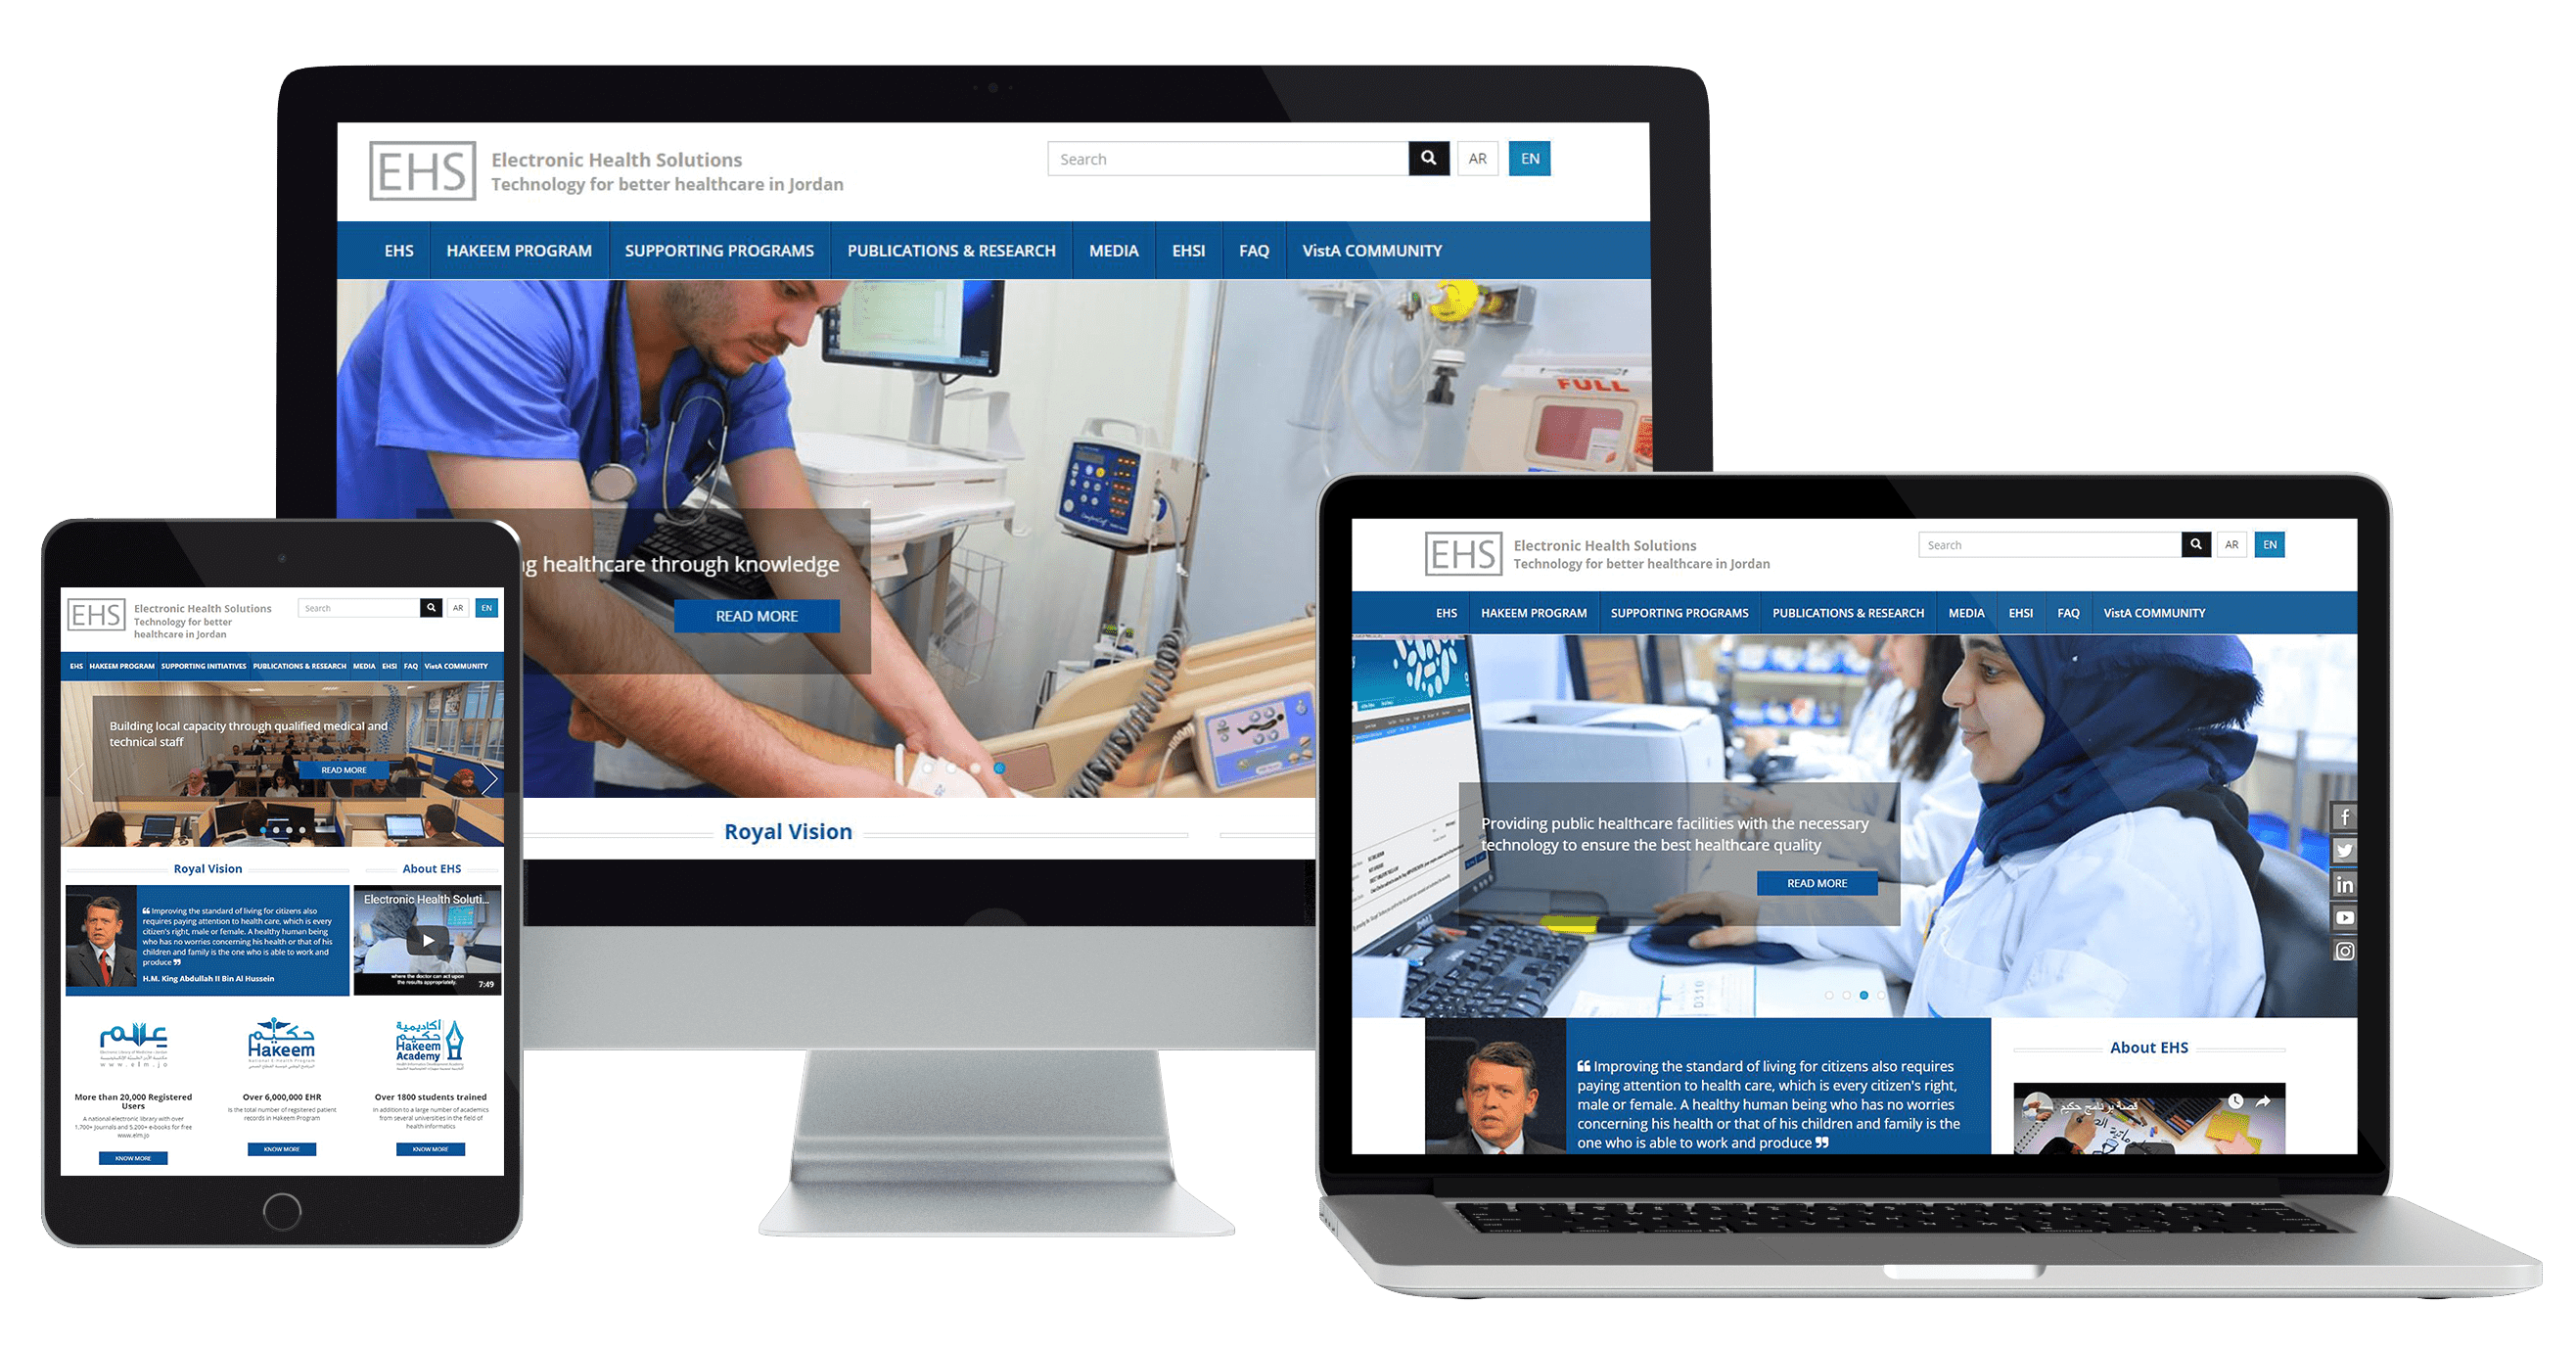 Sprintive Developed the website for Electronic Health solutions